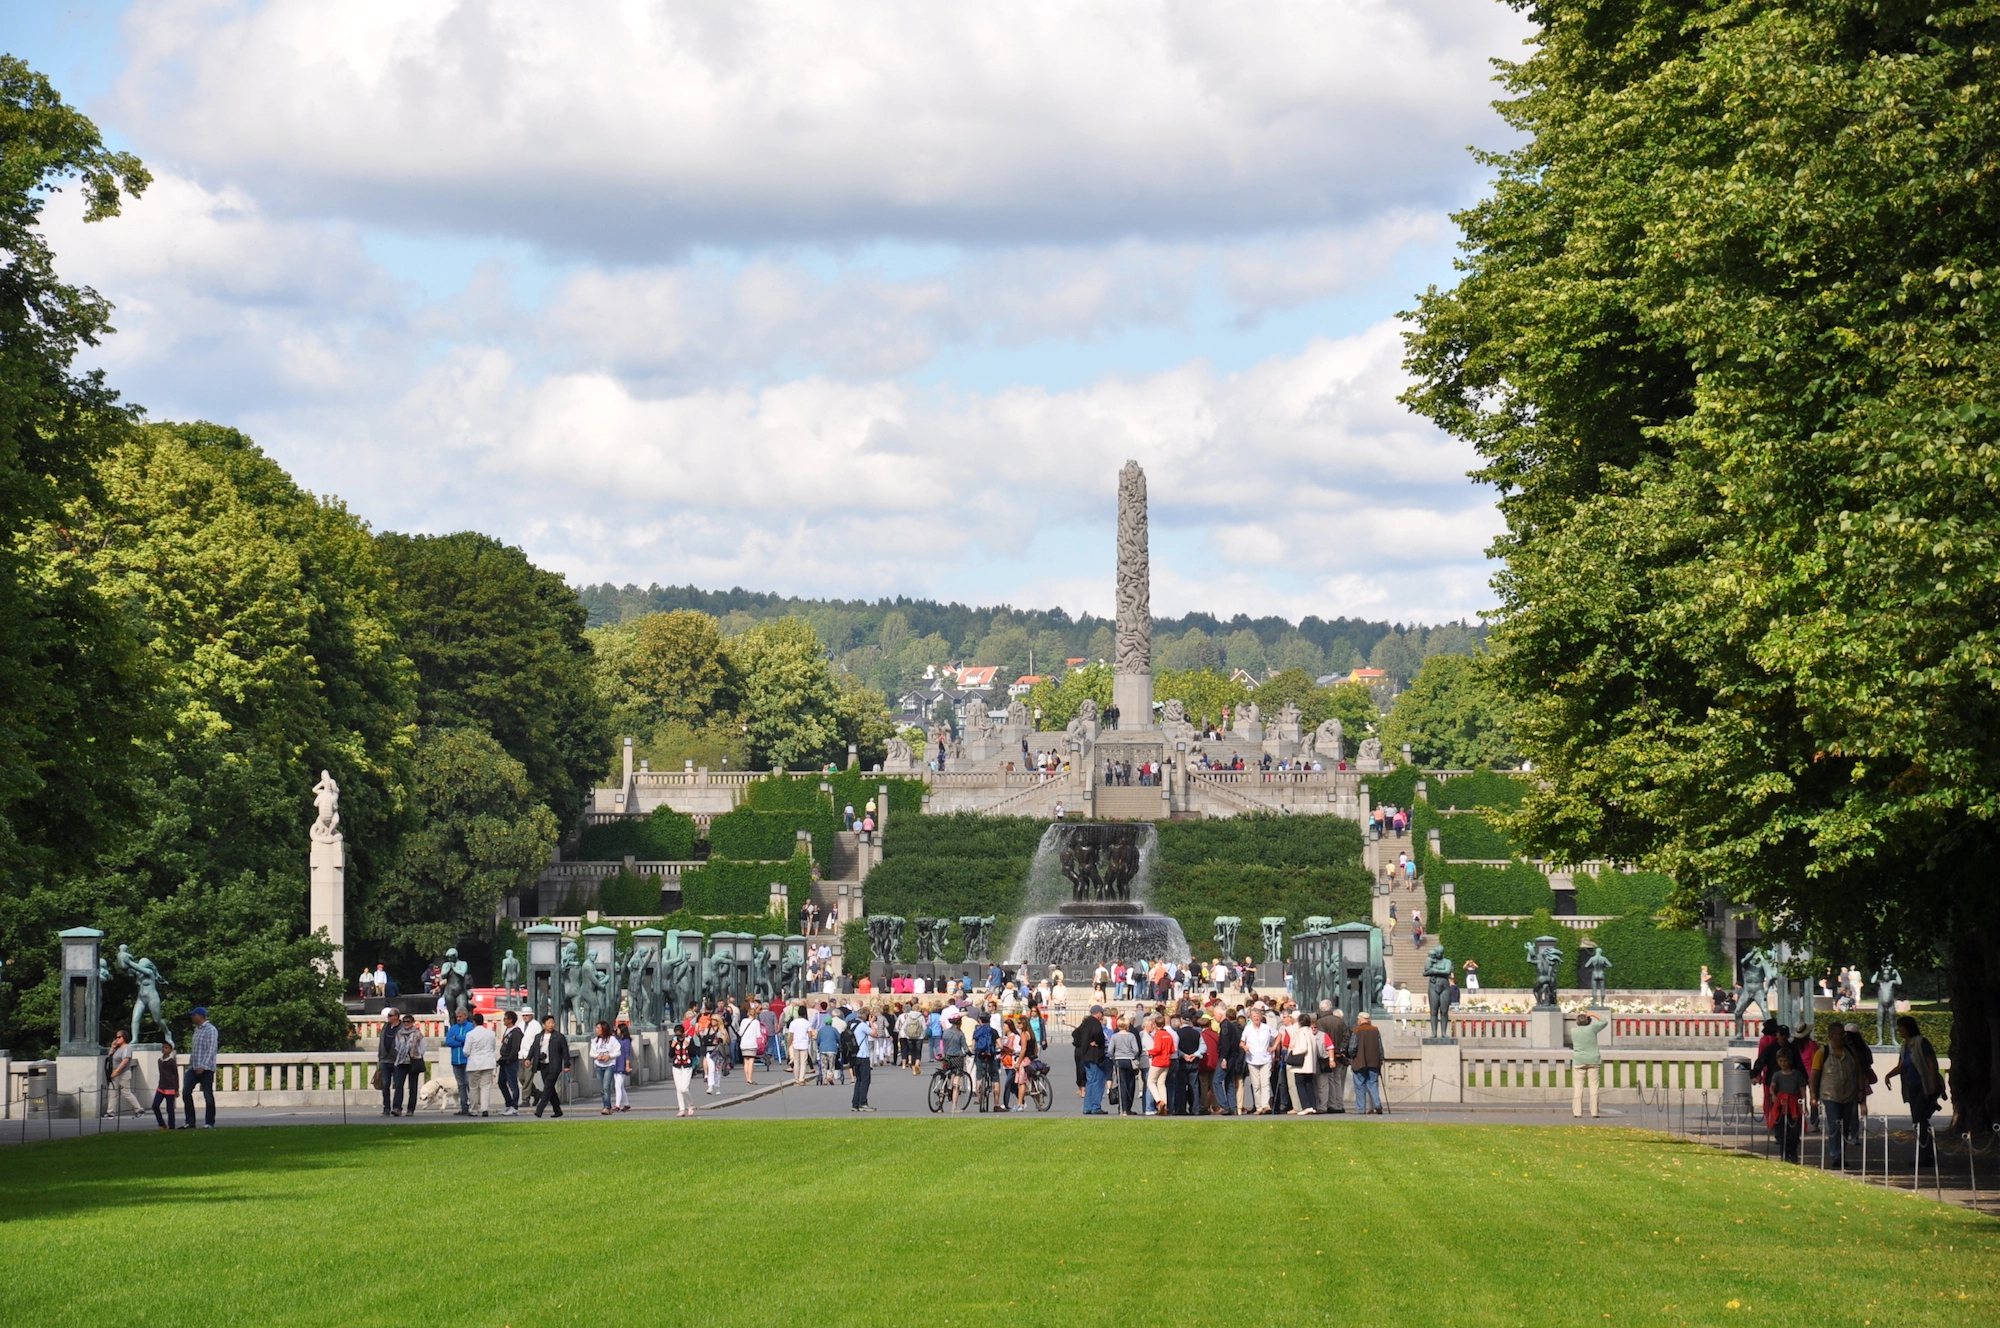 Activities in Oslo - Oslo Panorama Bus Tour - The Vigeland Park